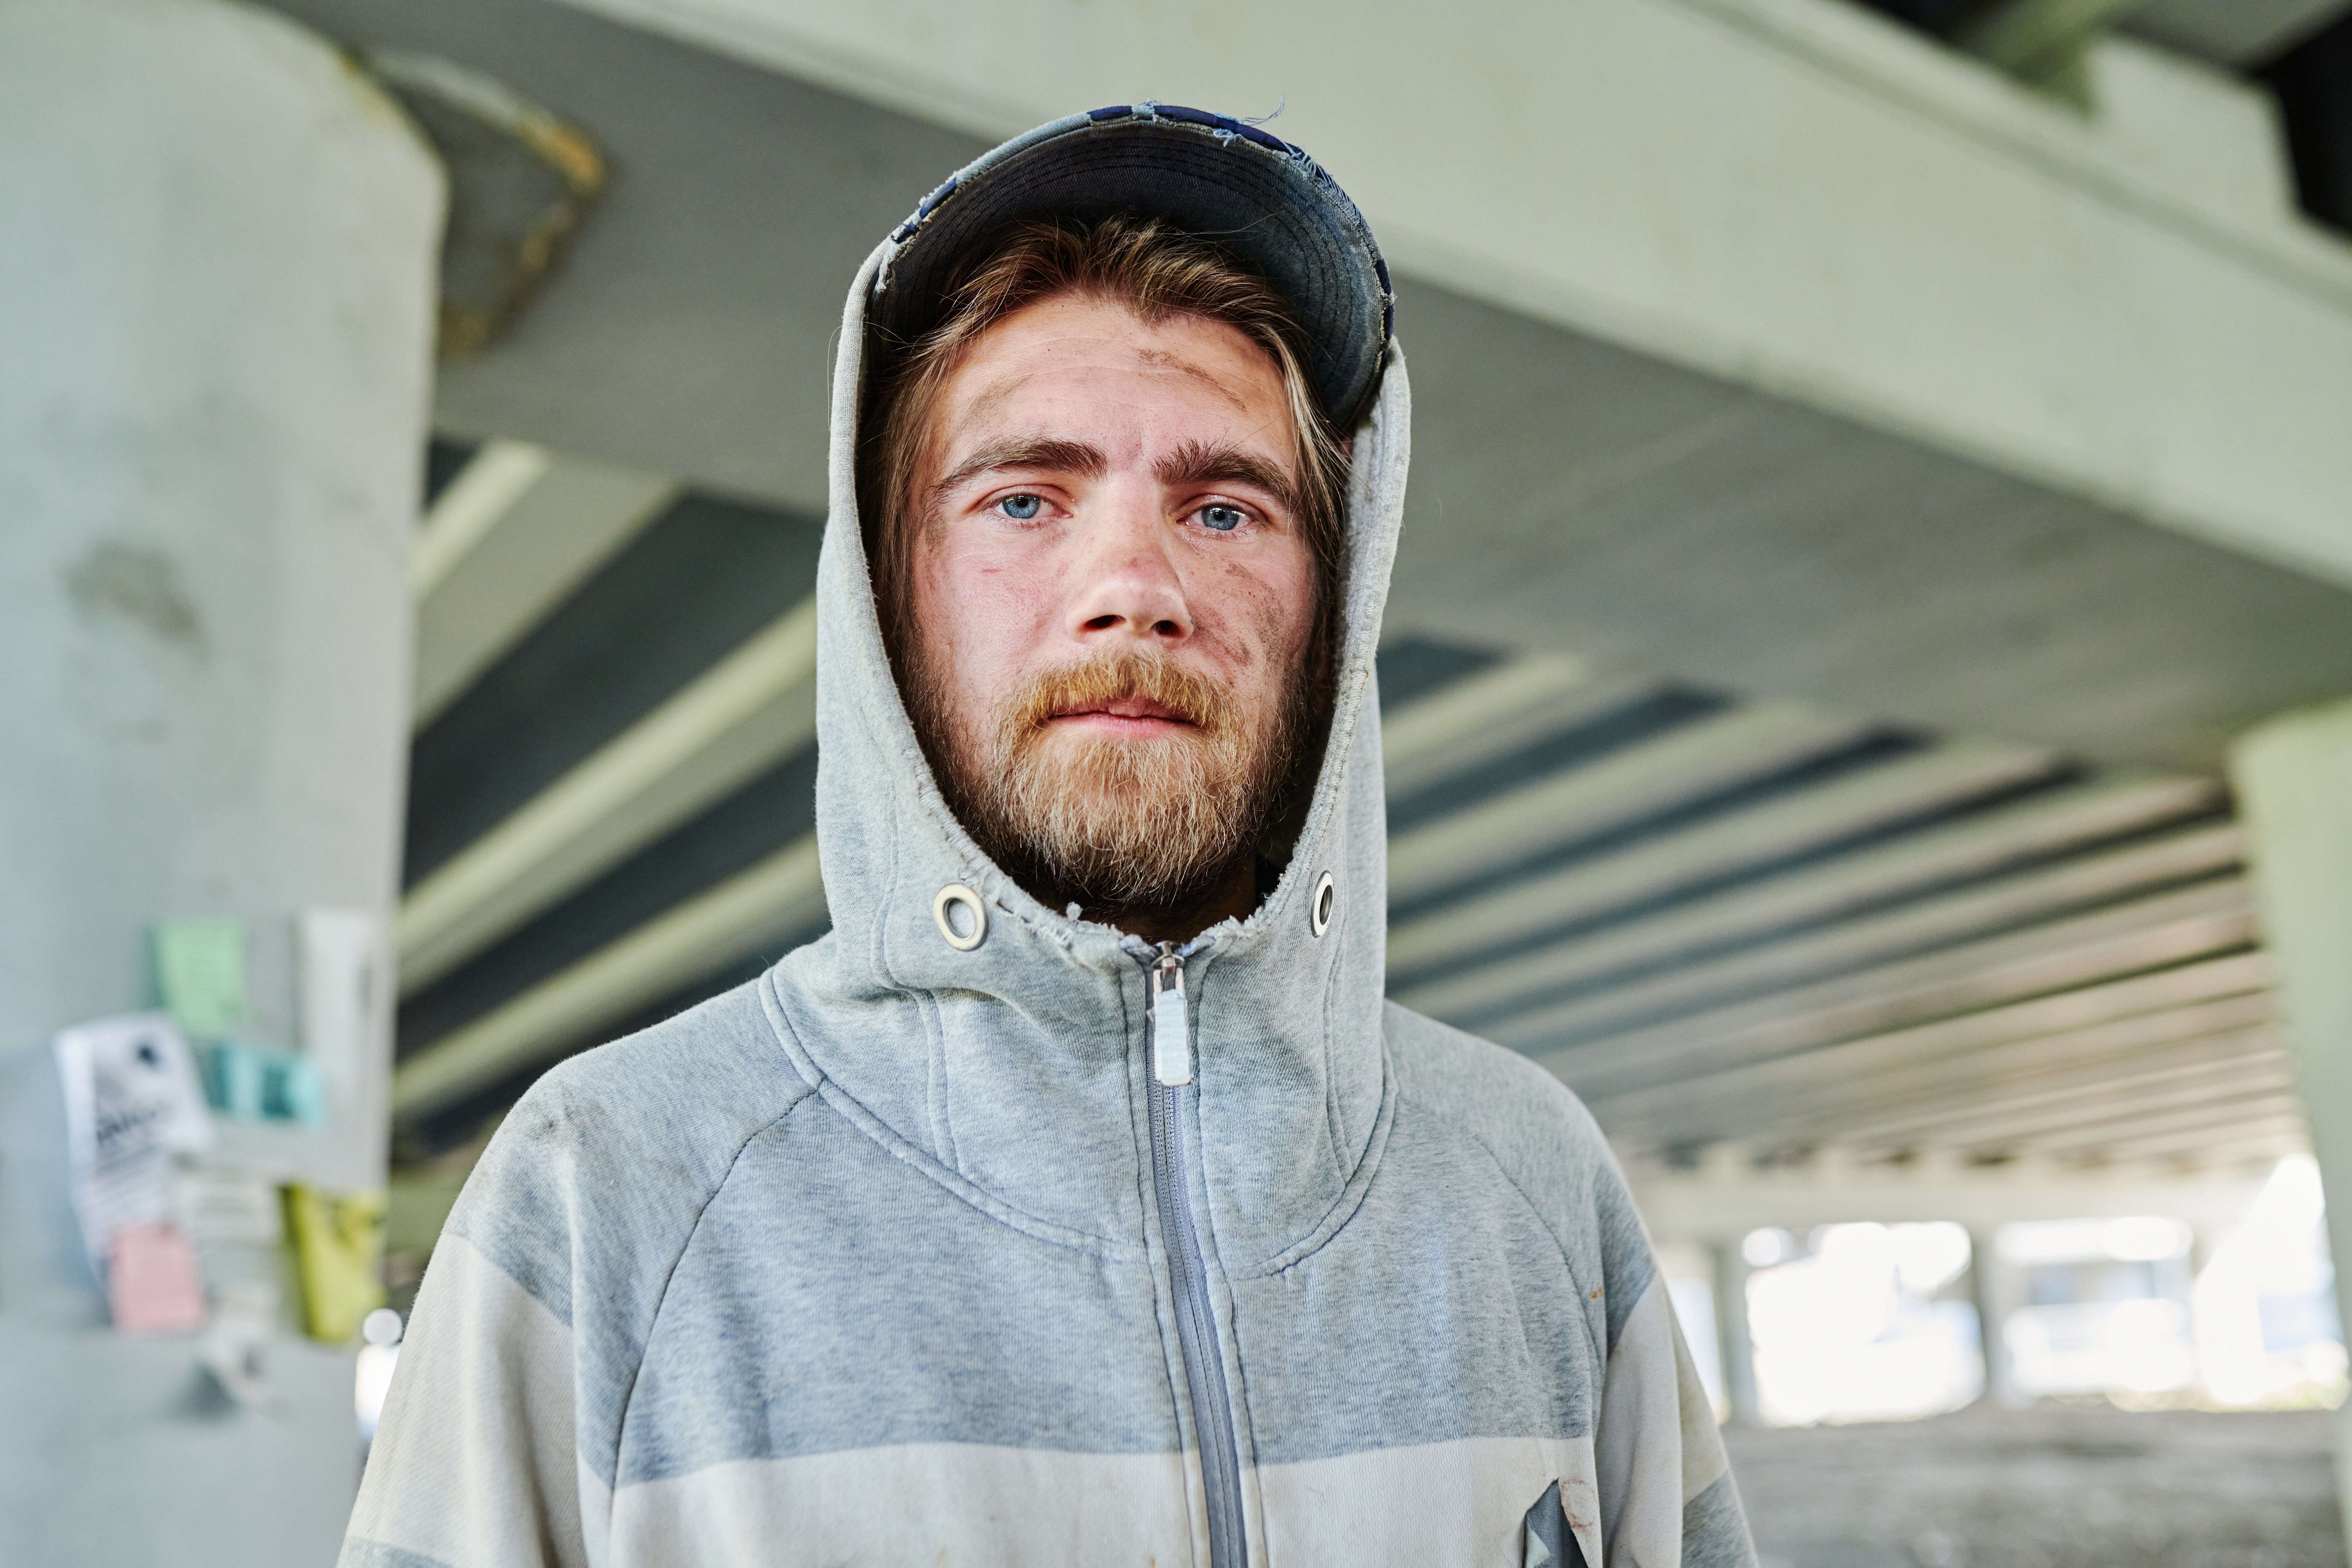 Poor homeless young man outdoors | Source: Shutterstock